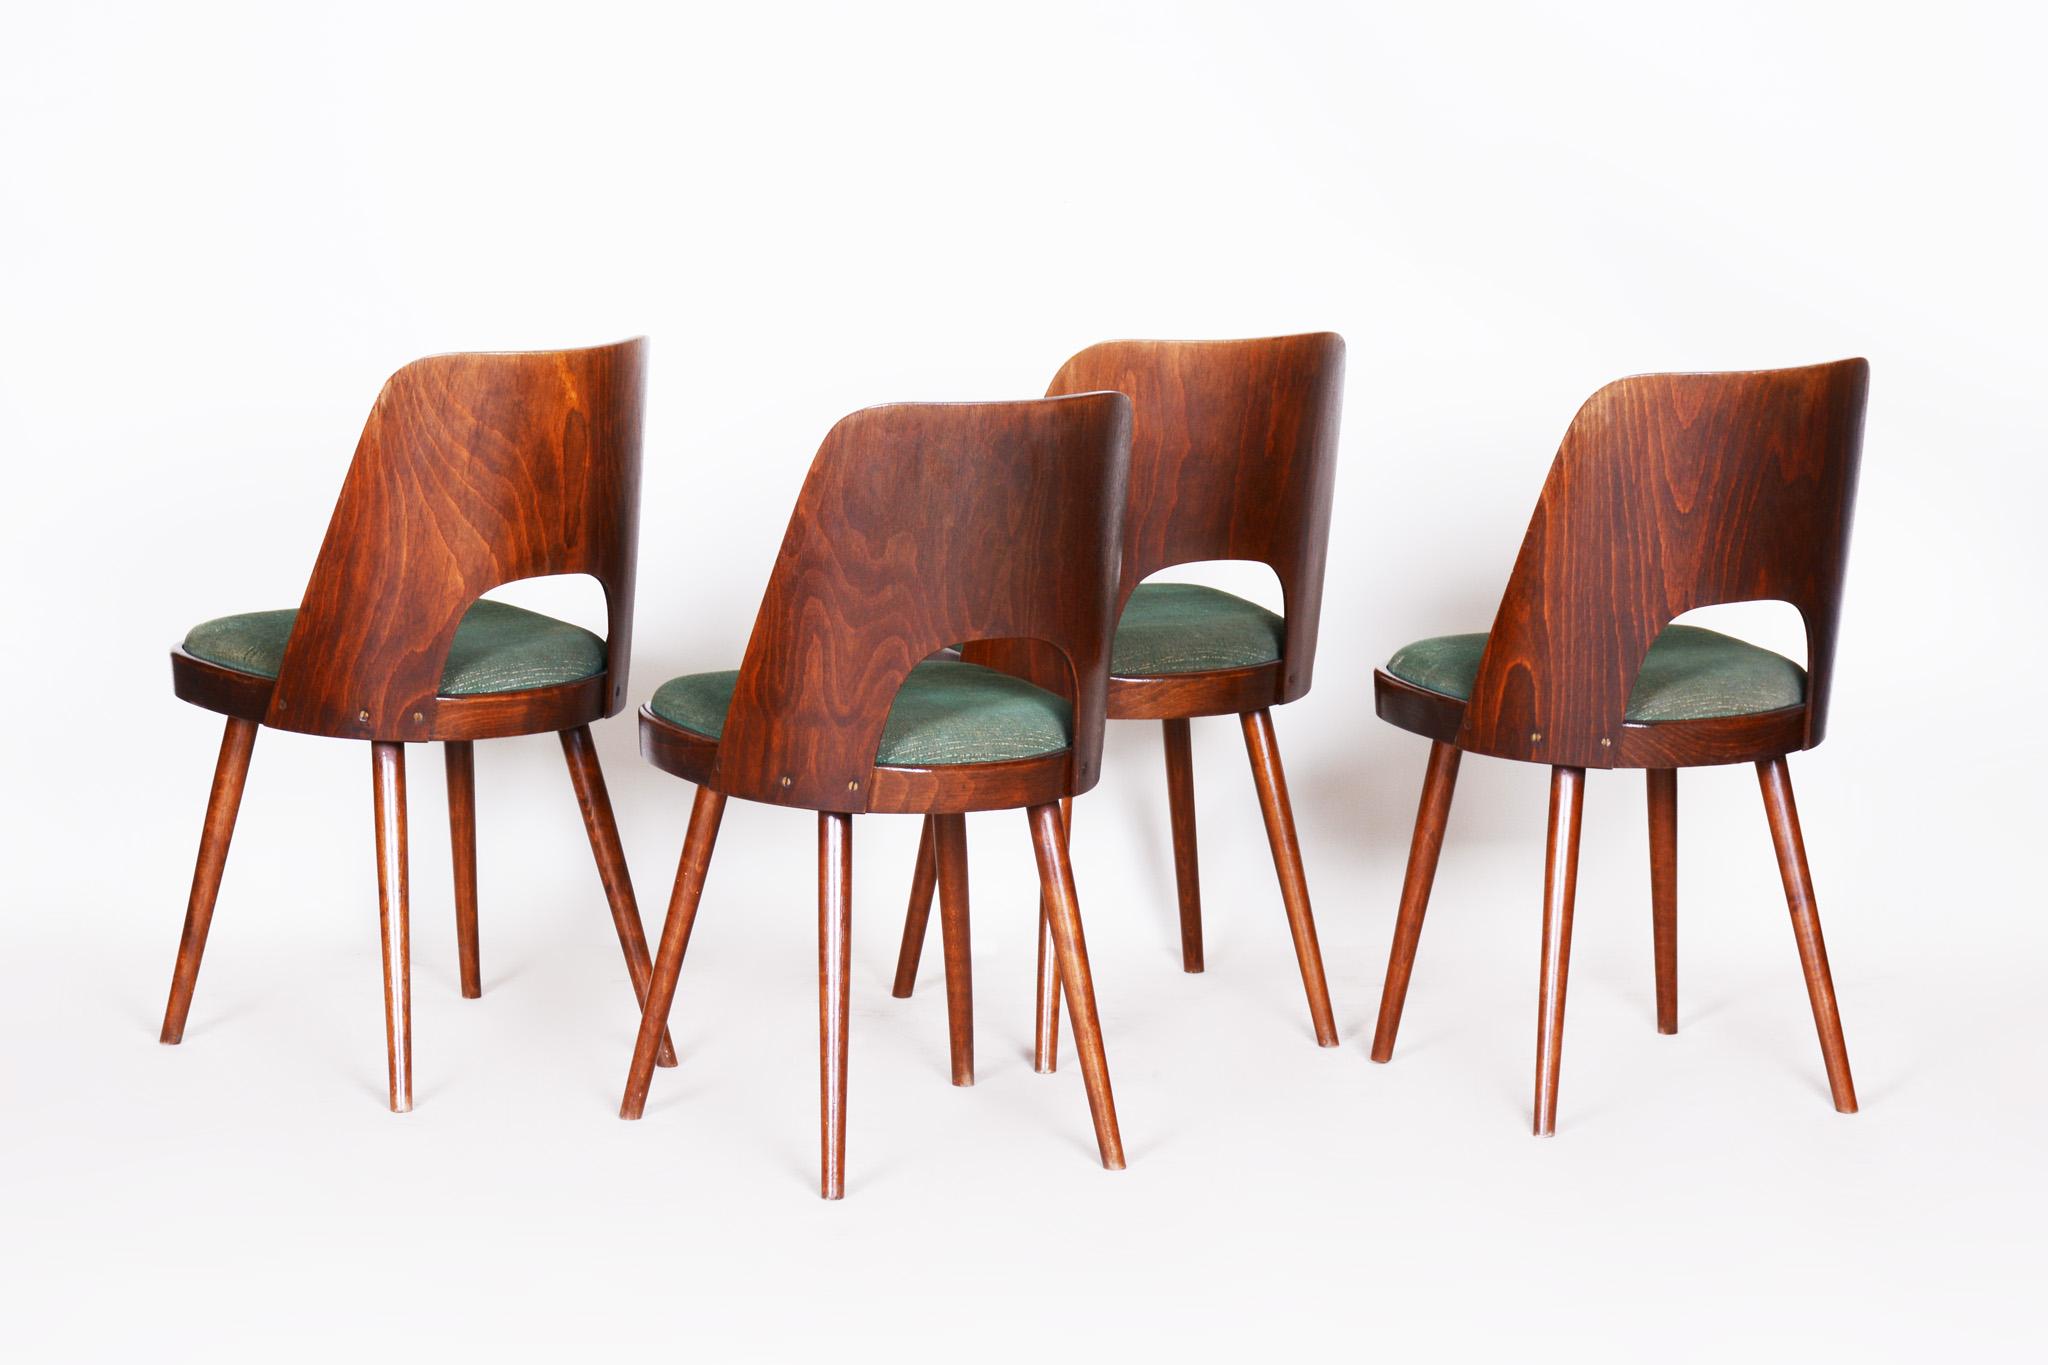 Fabric Czech Brown and Green Beech Chairs, 4 Pieces by Oswald Haerdtl - TON, 1950s